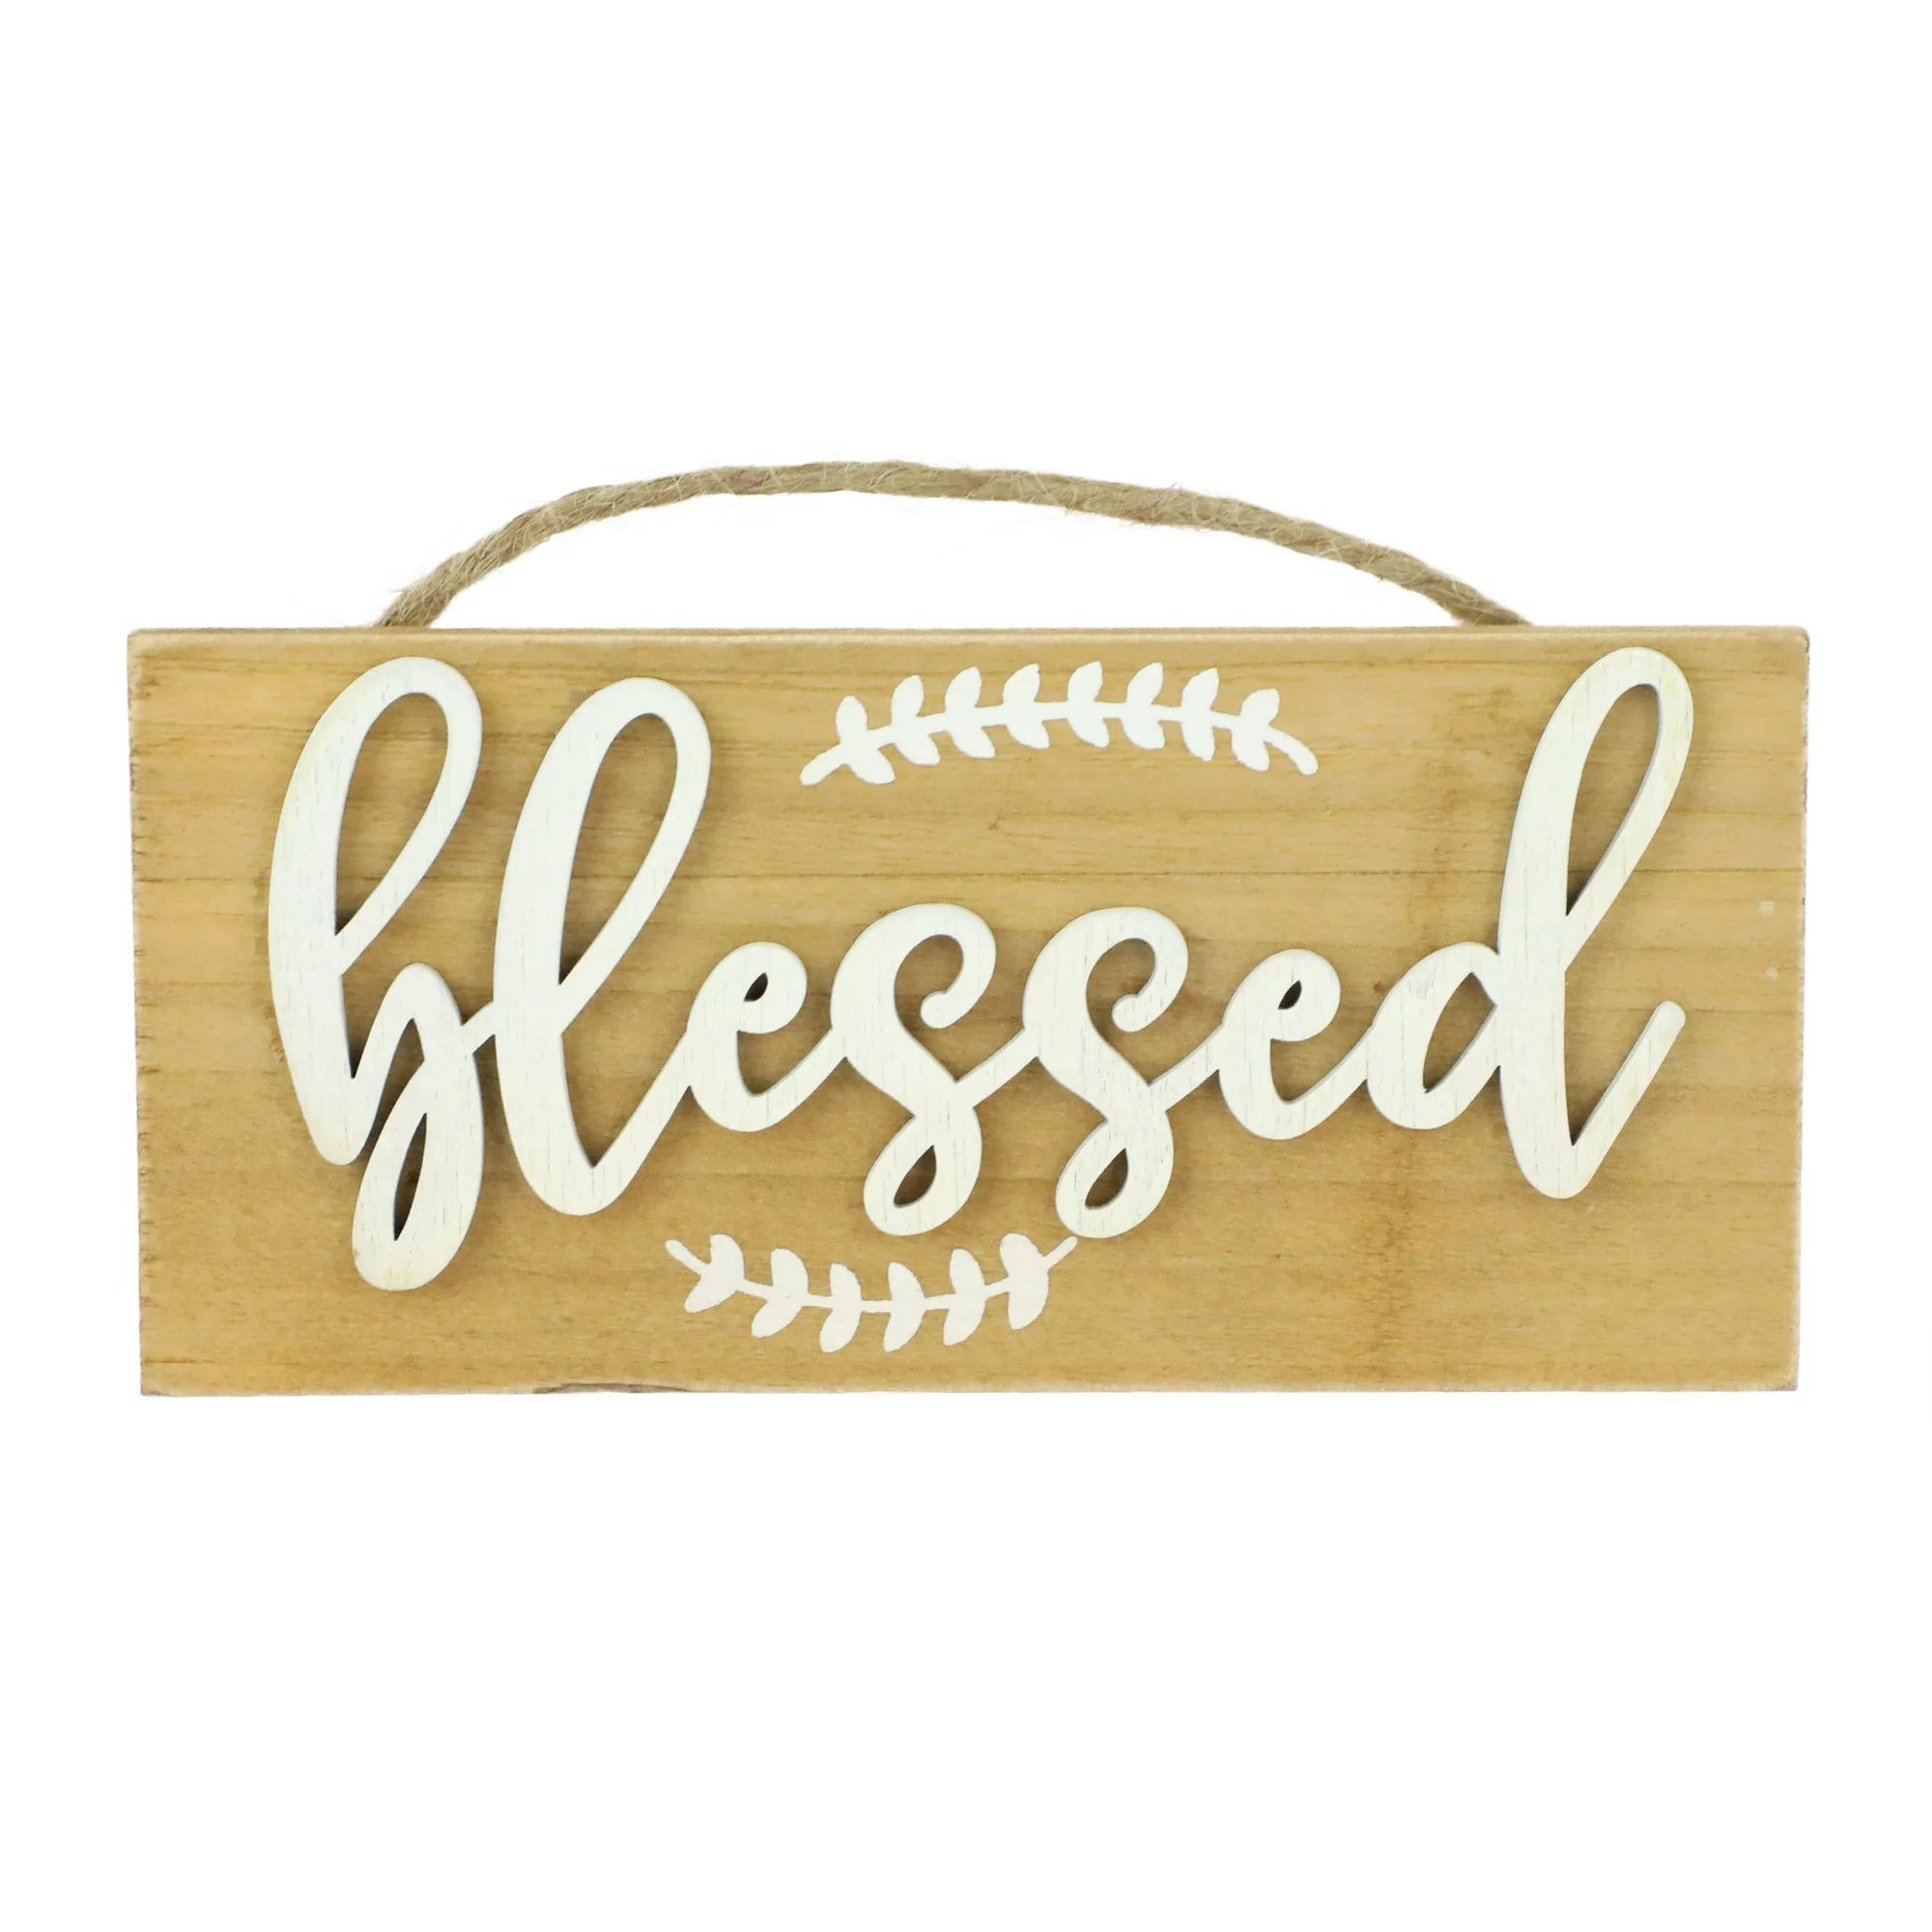 Way To Celebrate Harvest Wood Hanging Wall Decor, Blessed | Walmart (US)